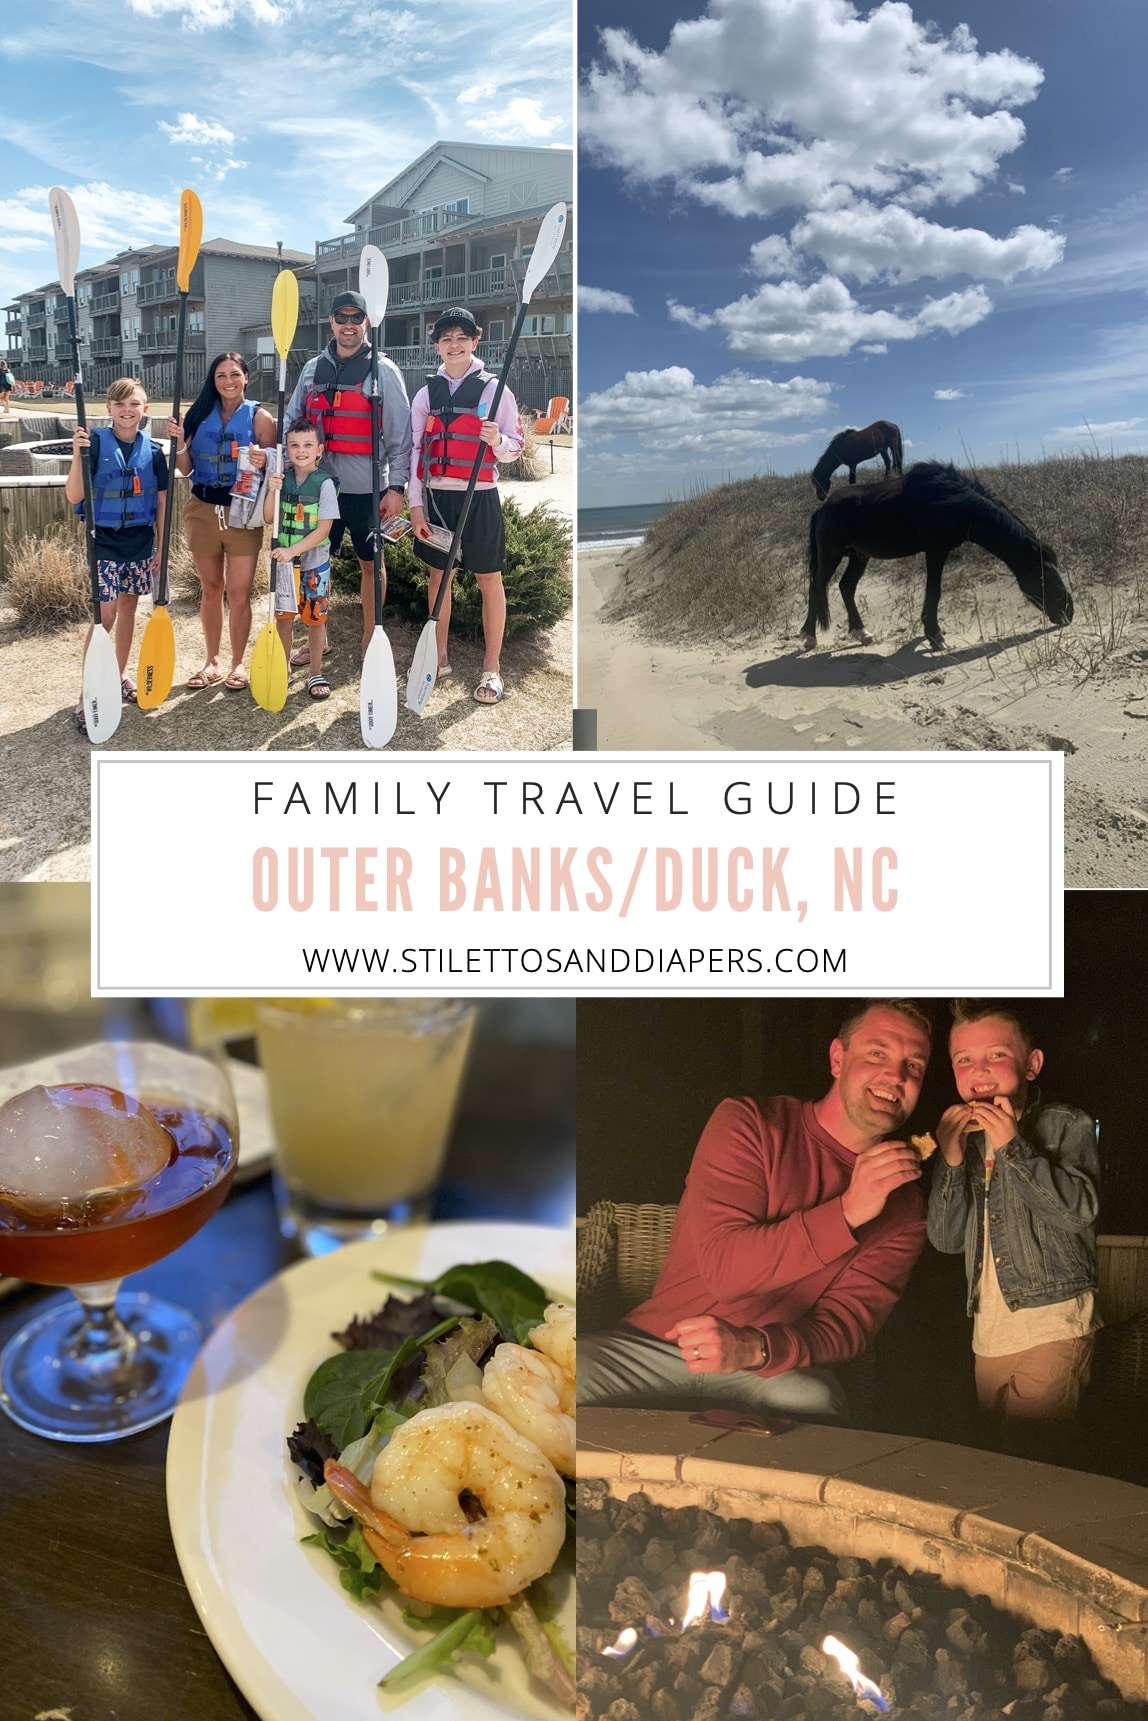 Family Travel Guide: Outer Banks/Duck, NC